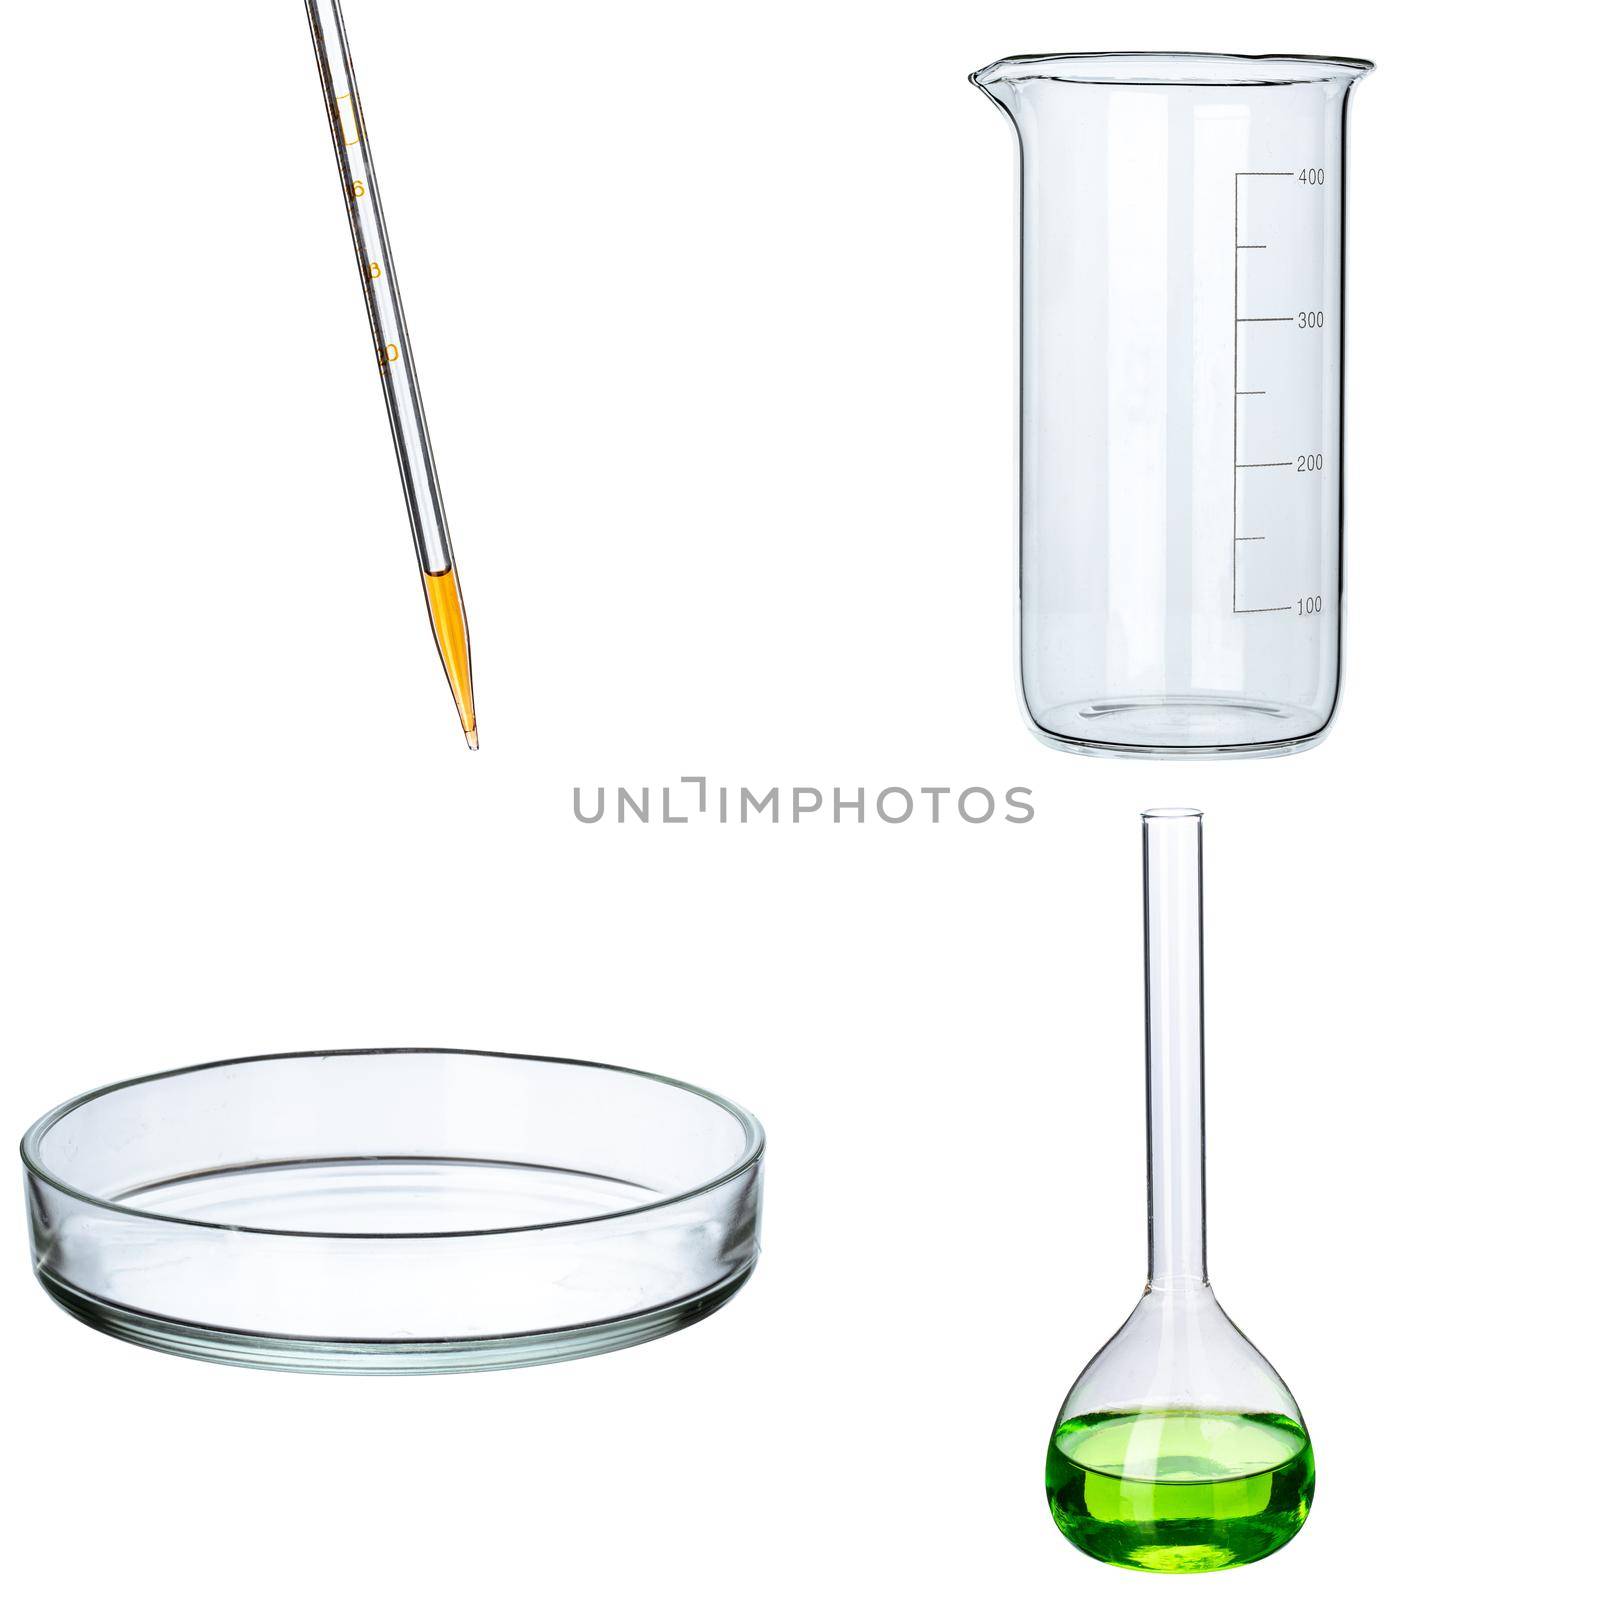 Collage of laboratory glassware isolated on white background